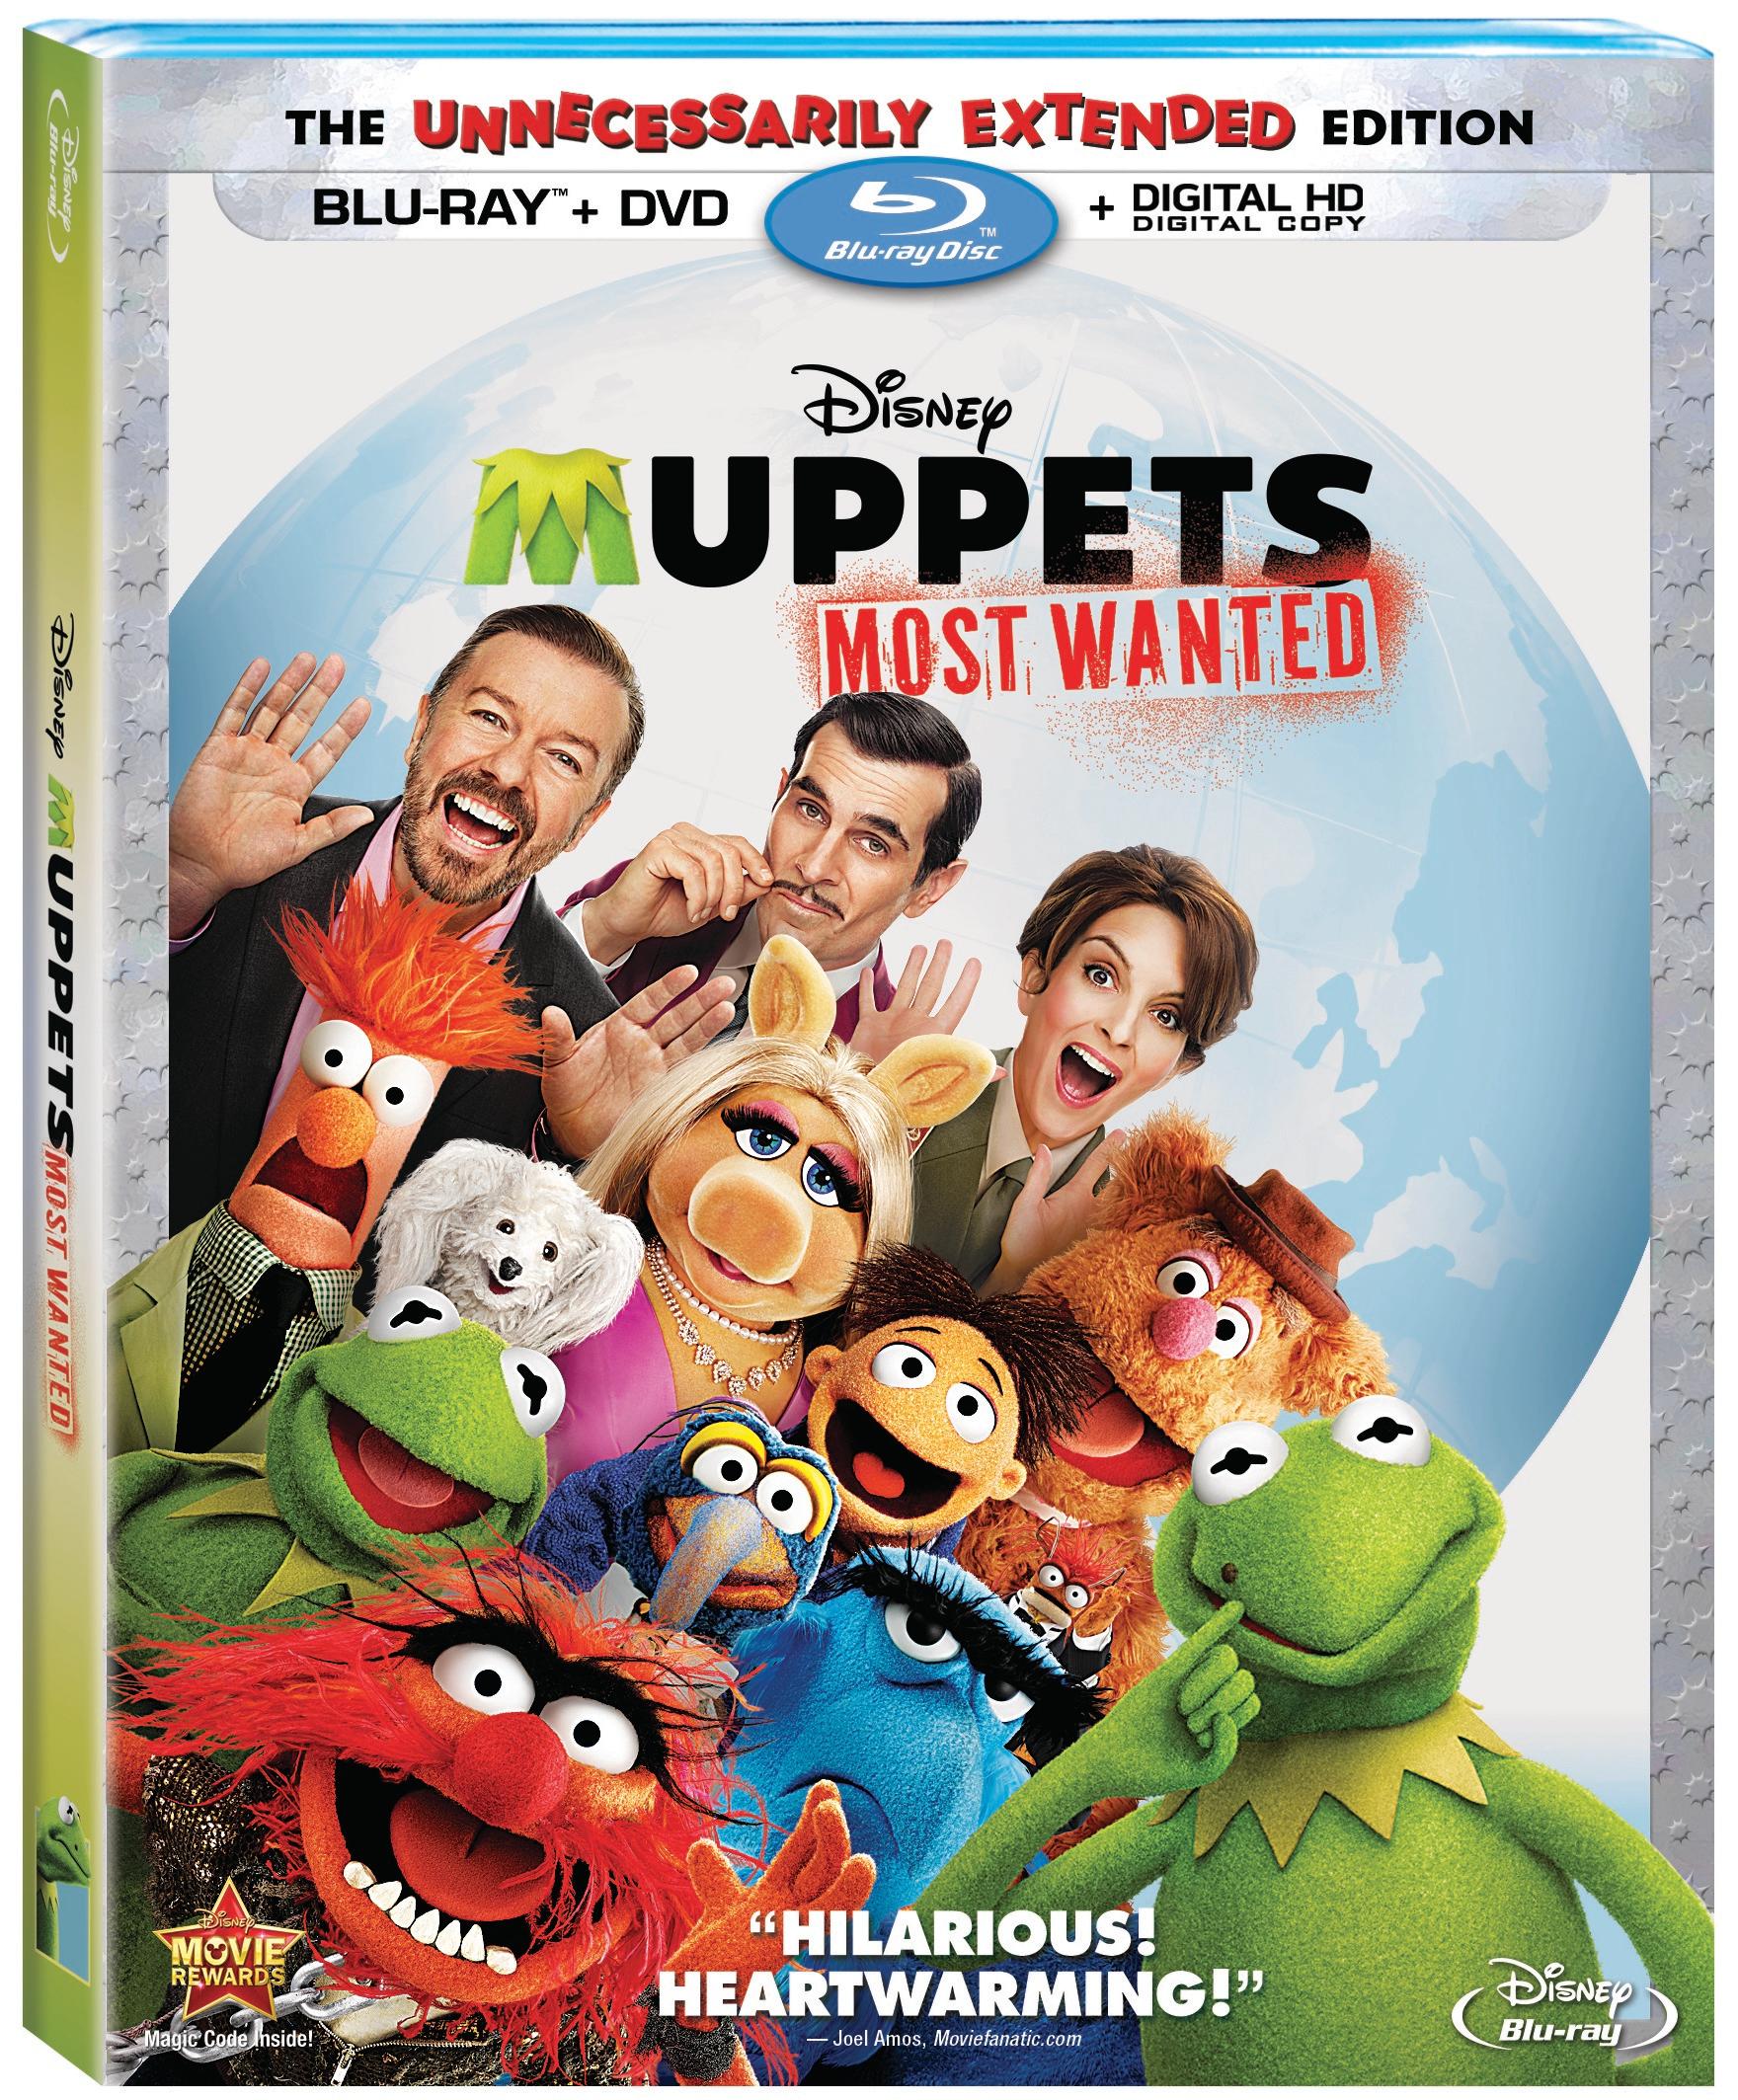 Disney’s “Muppets Most Wanted” Available On Blu-Ray And DVD August 12th